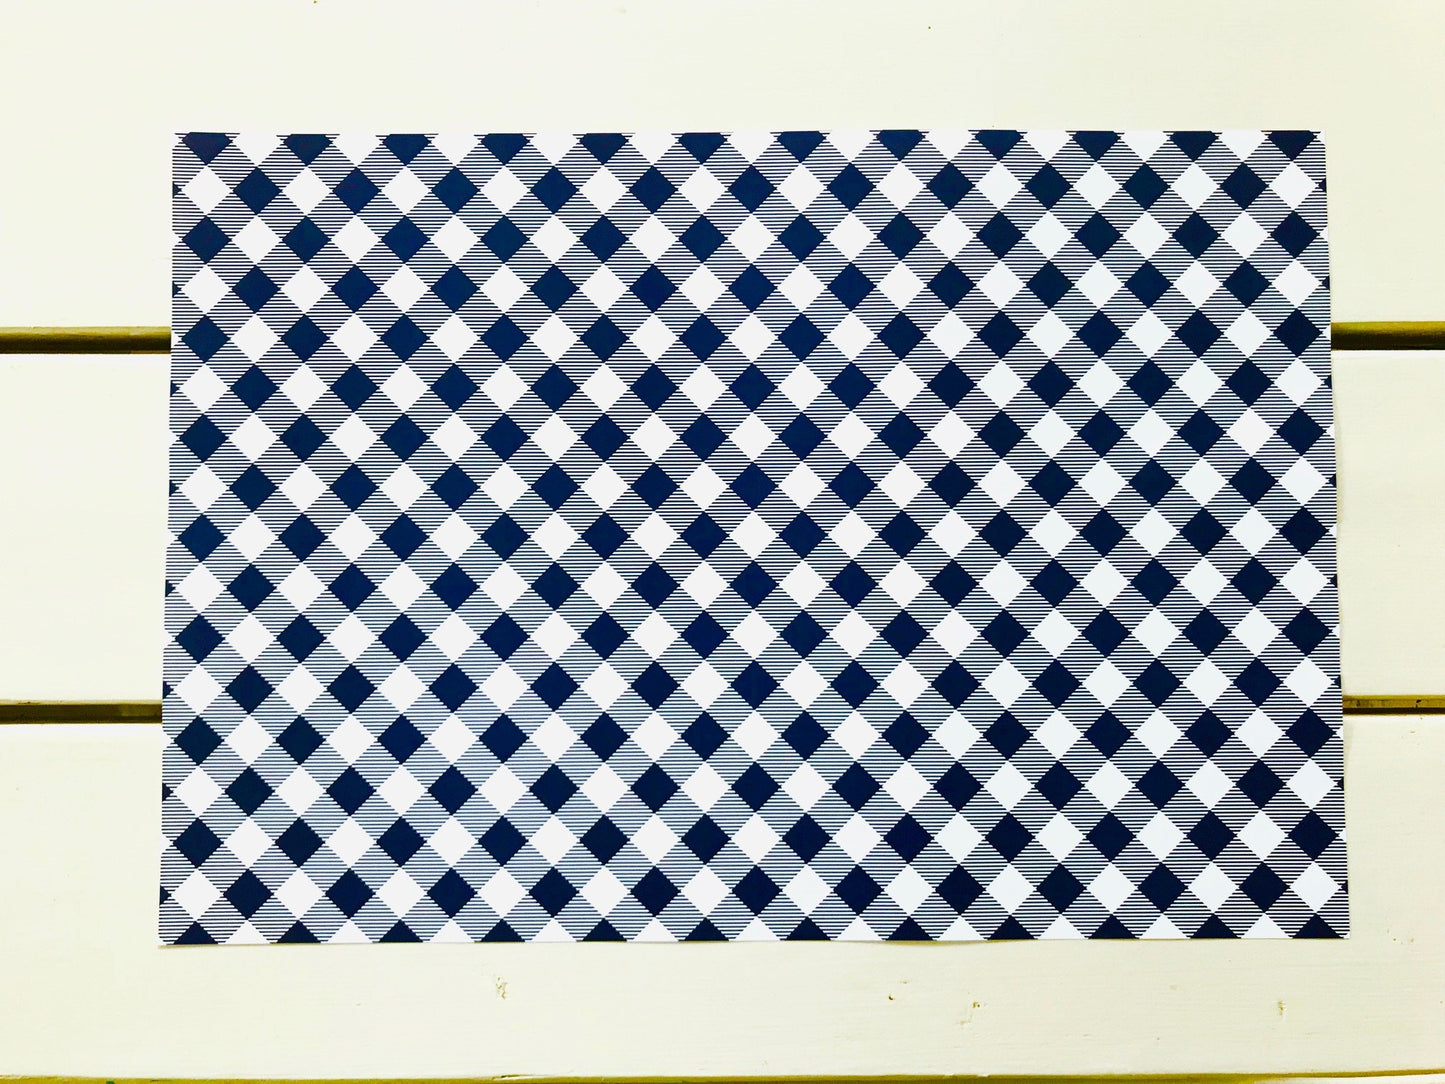 Navy Gingham Placemats